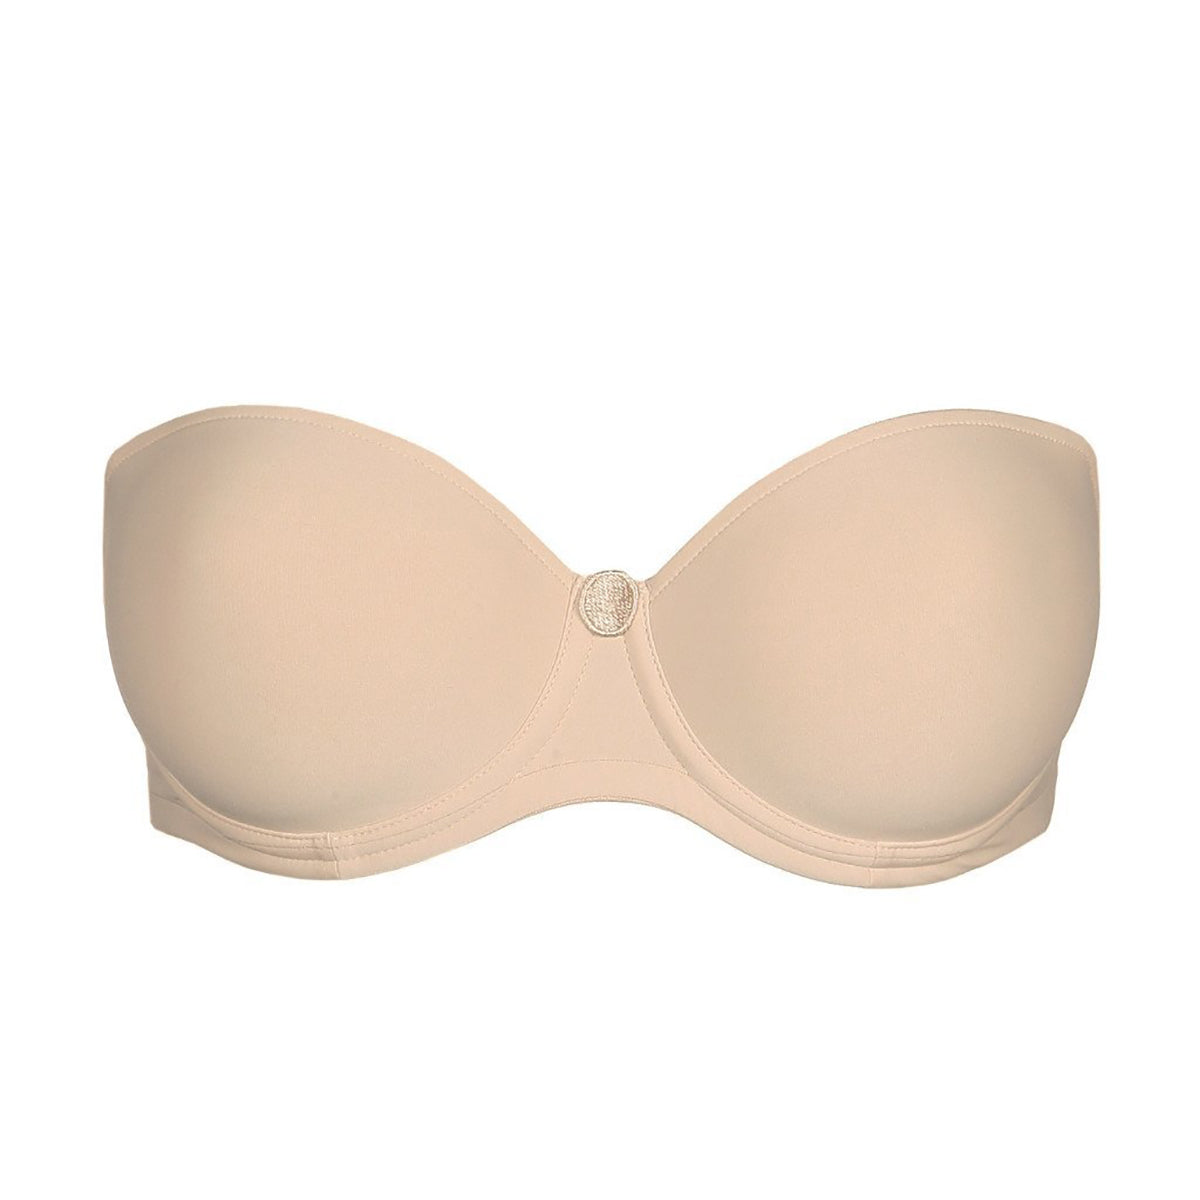 Piccinino - After Eden Double Gel strapless gel bra This Double